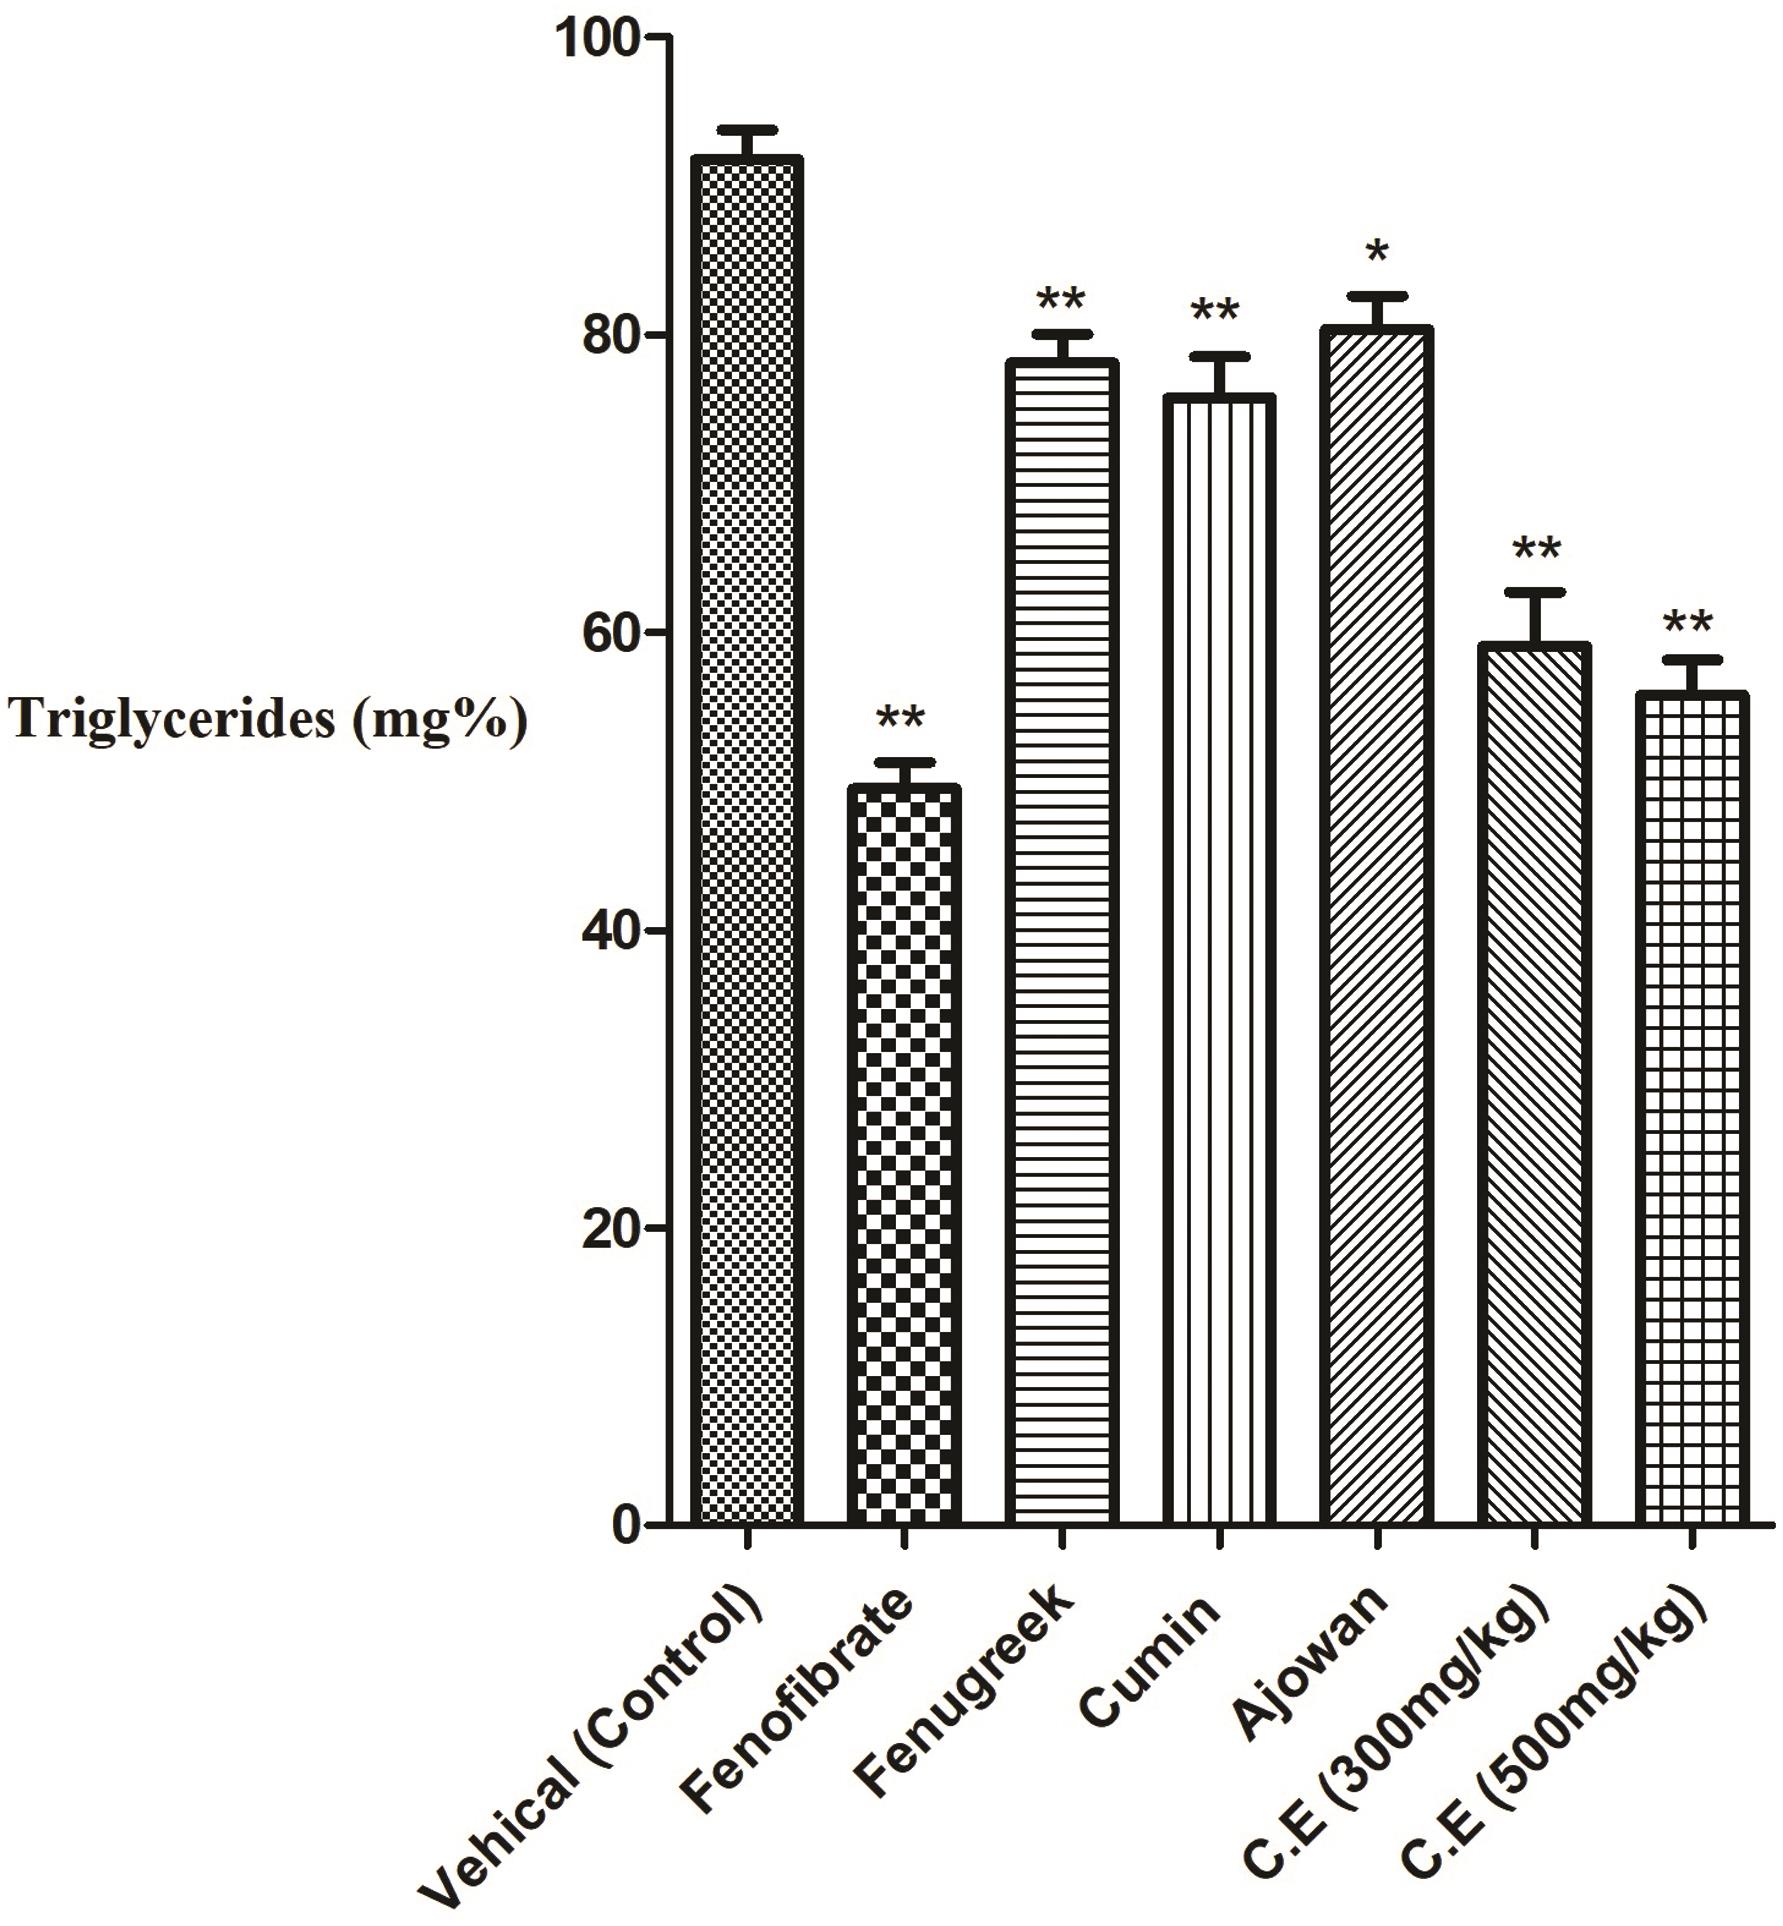 Triglycerides (mg%) in various treated hypercholesterolemic rats.